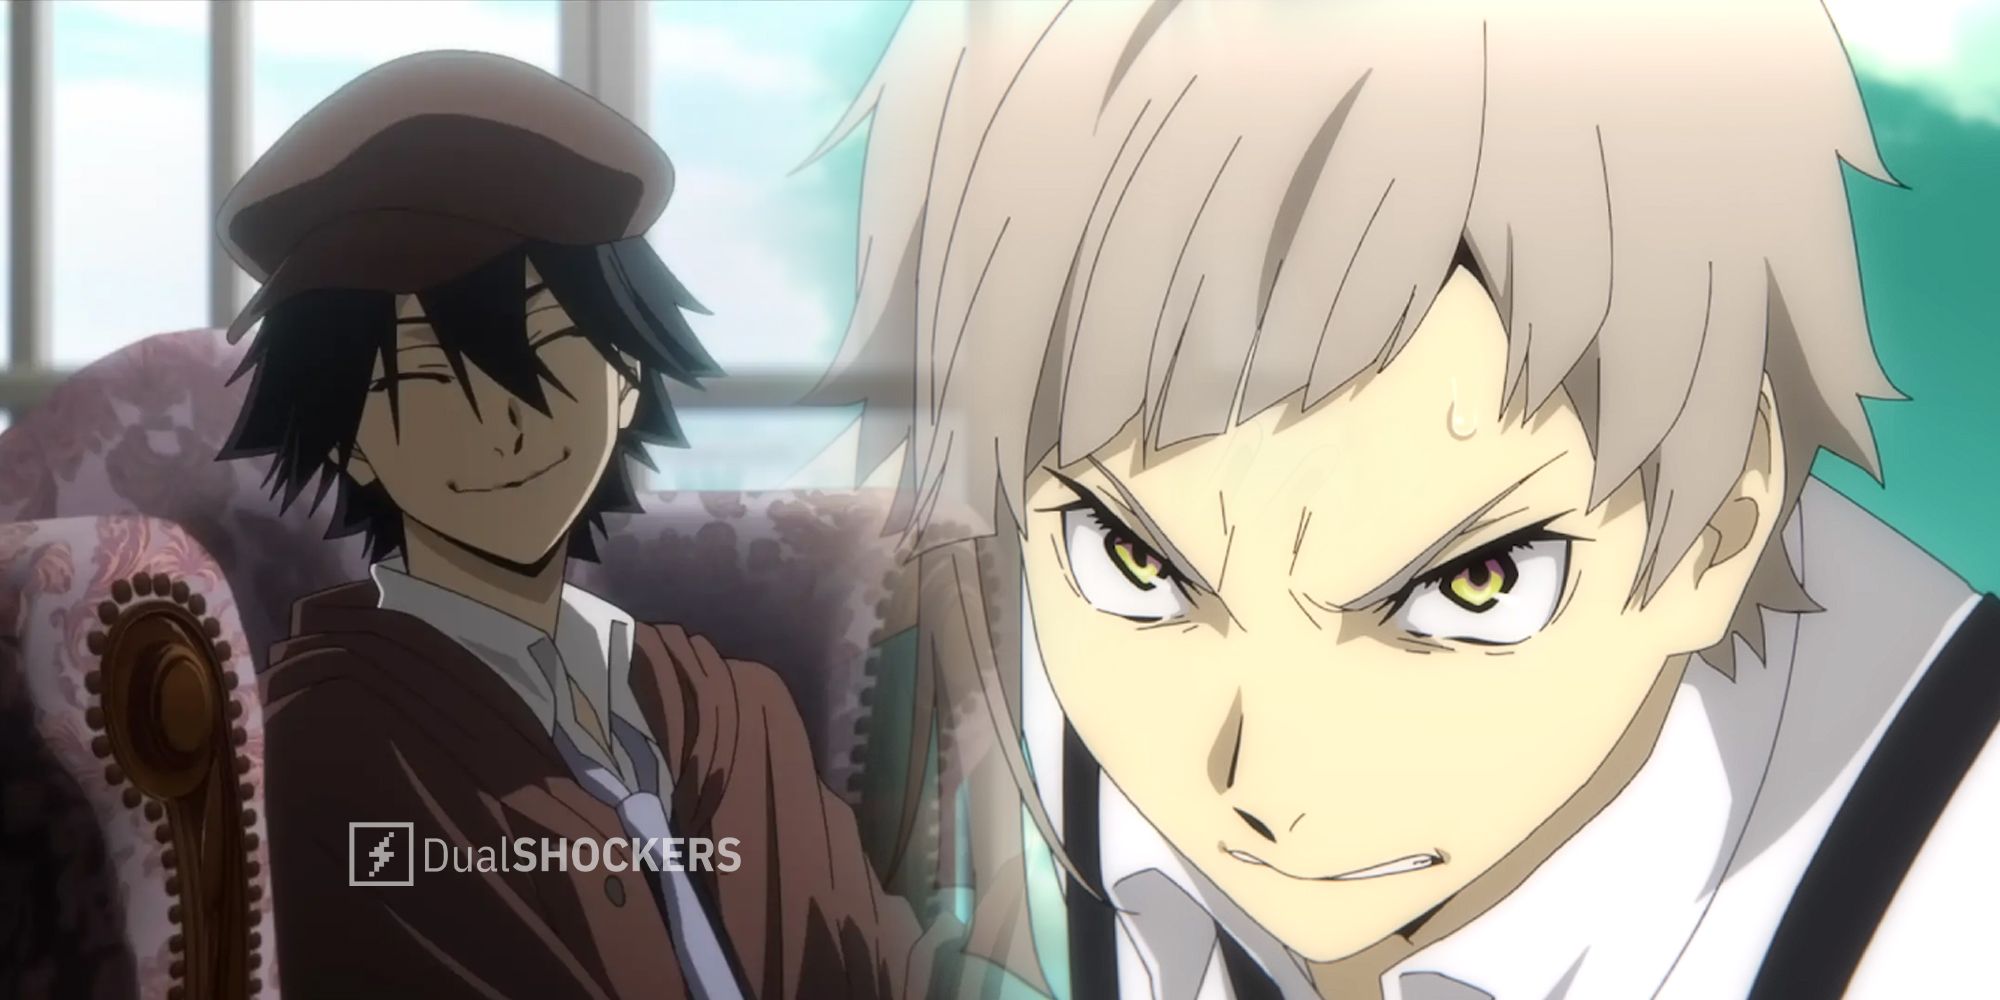 Watch Bungo Stray Dogs Season 2 Episode 19 - Will of Tycoon Online Now